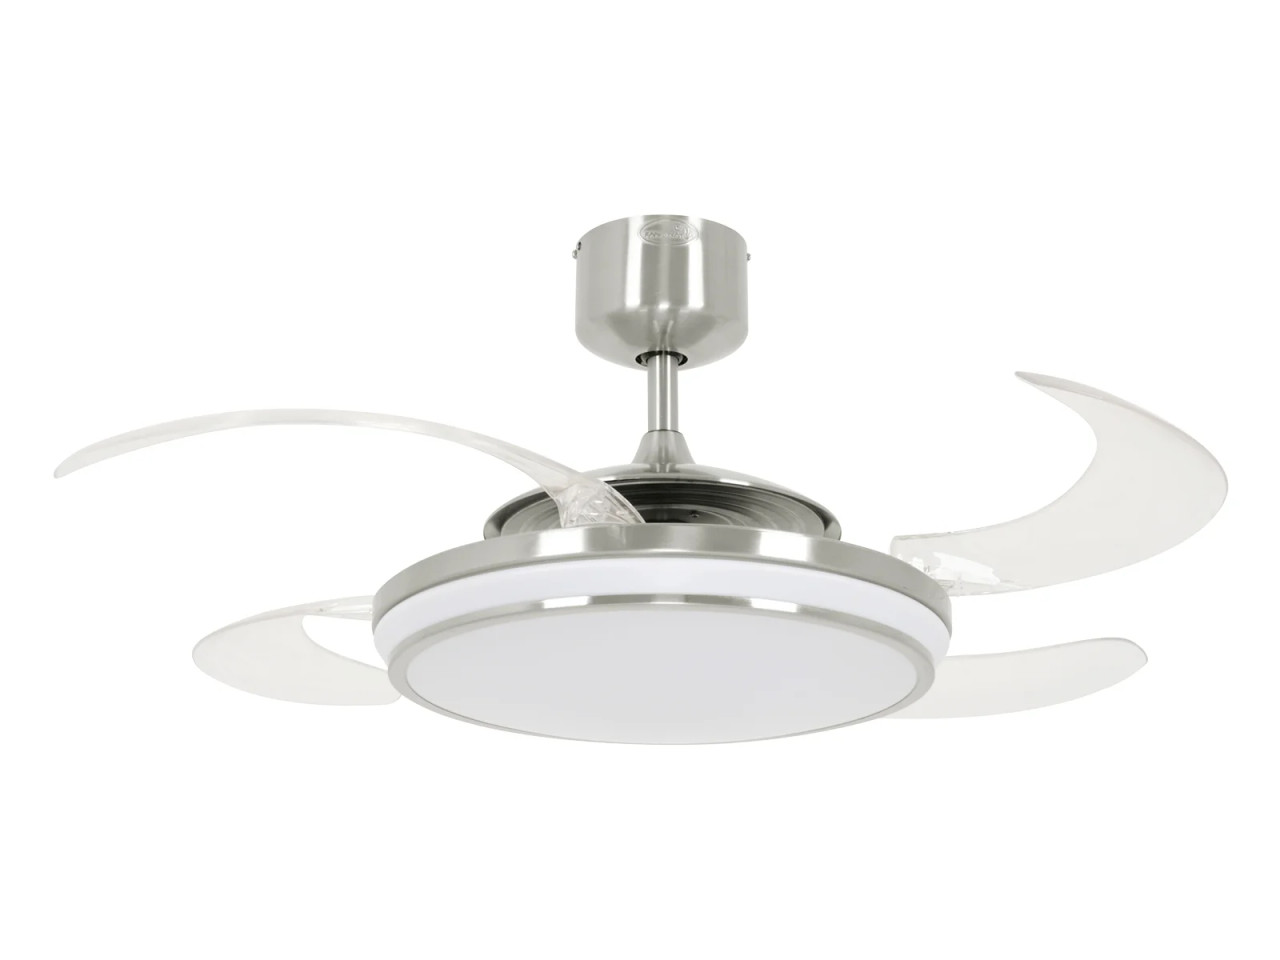 Brushed chrome fan with retractable blades